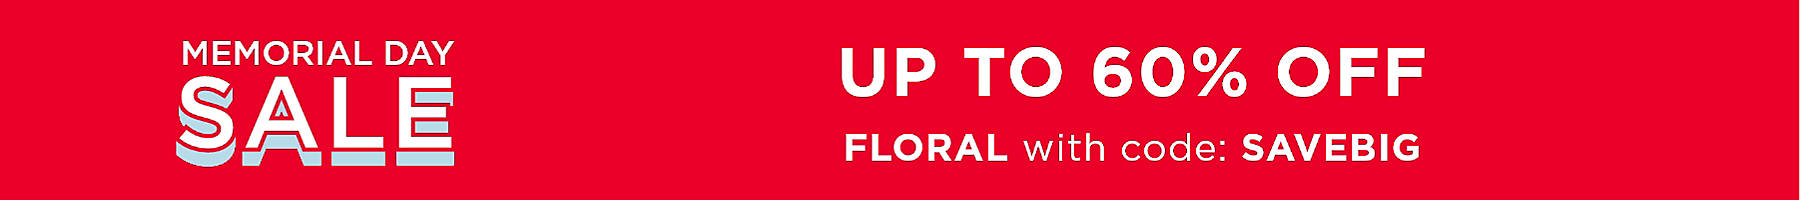 memorial day sale up to 60% off floral with code: SAVEBIG